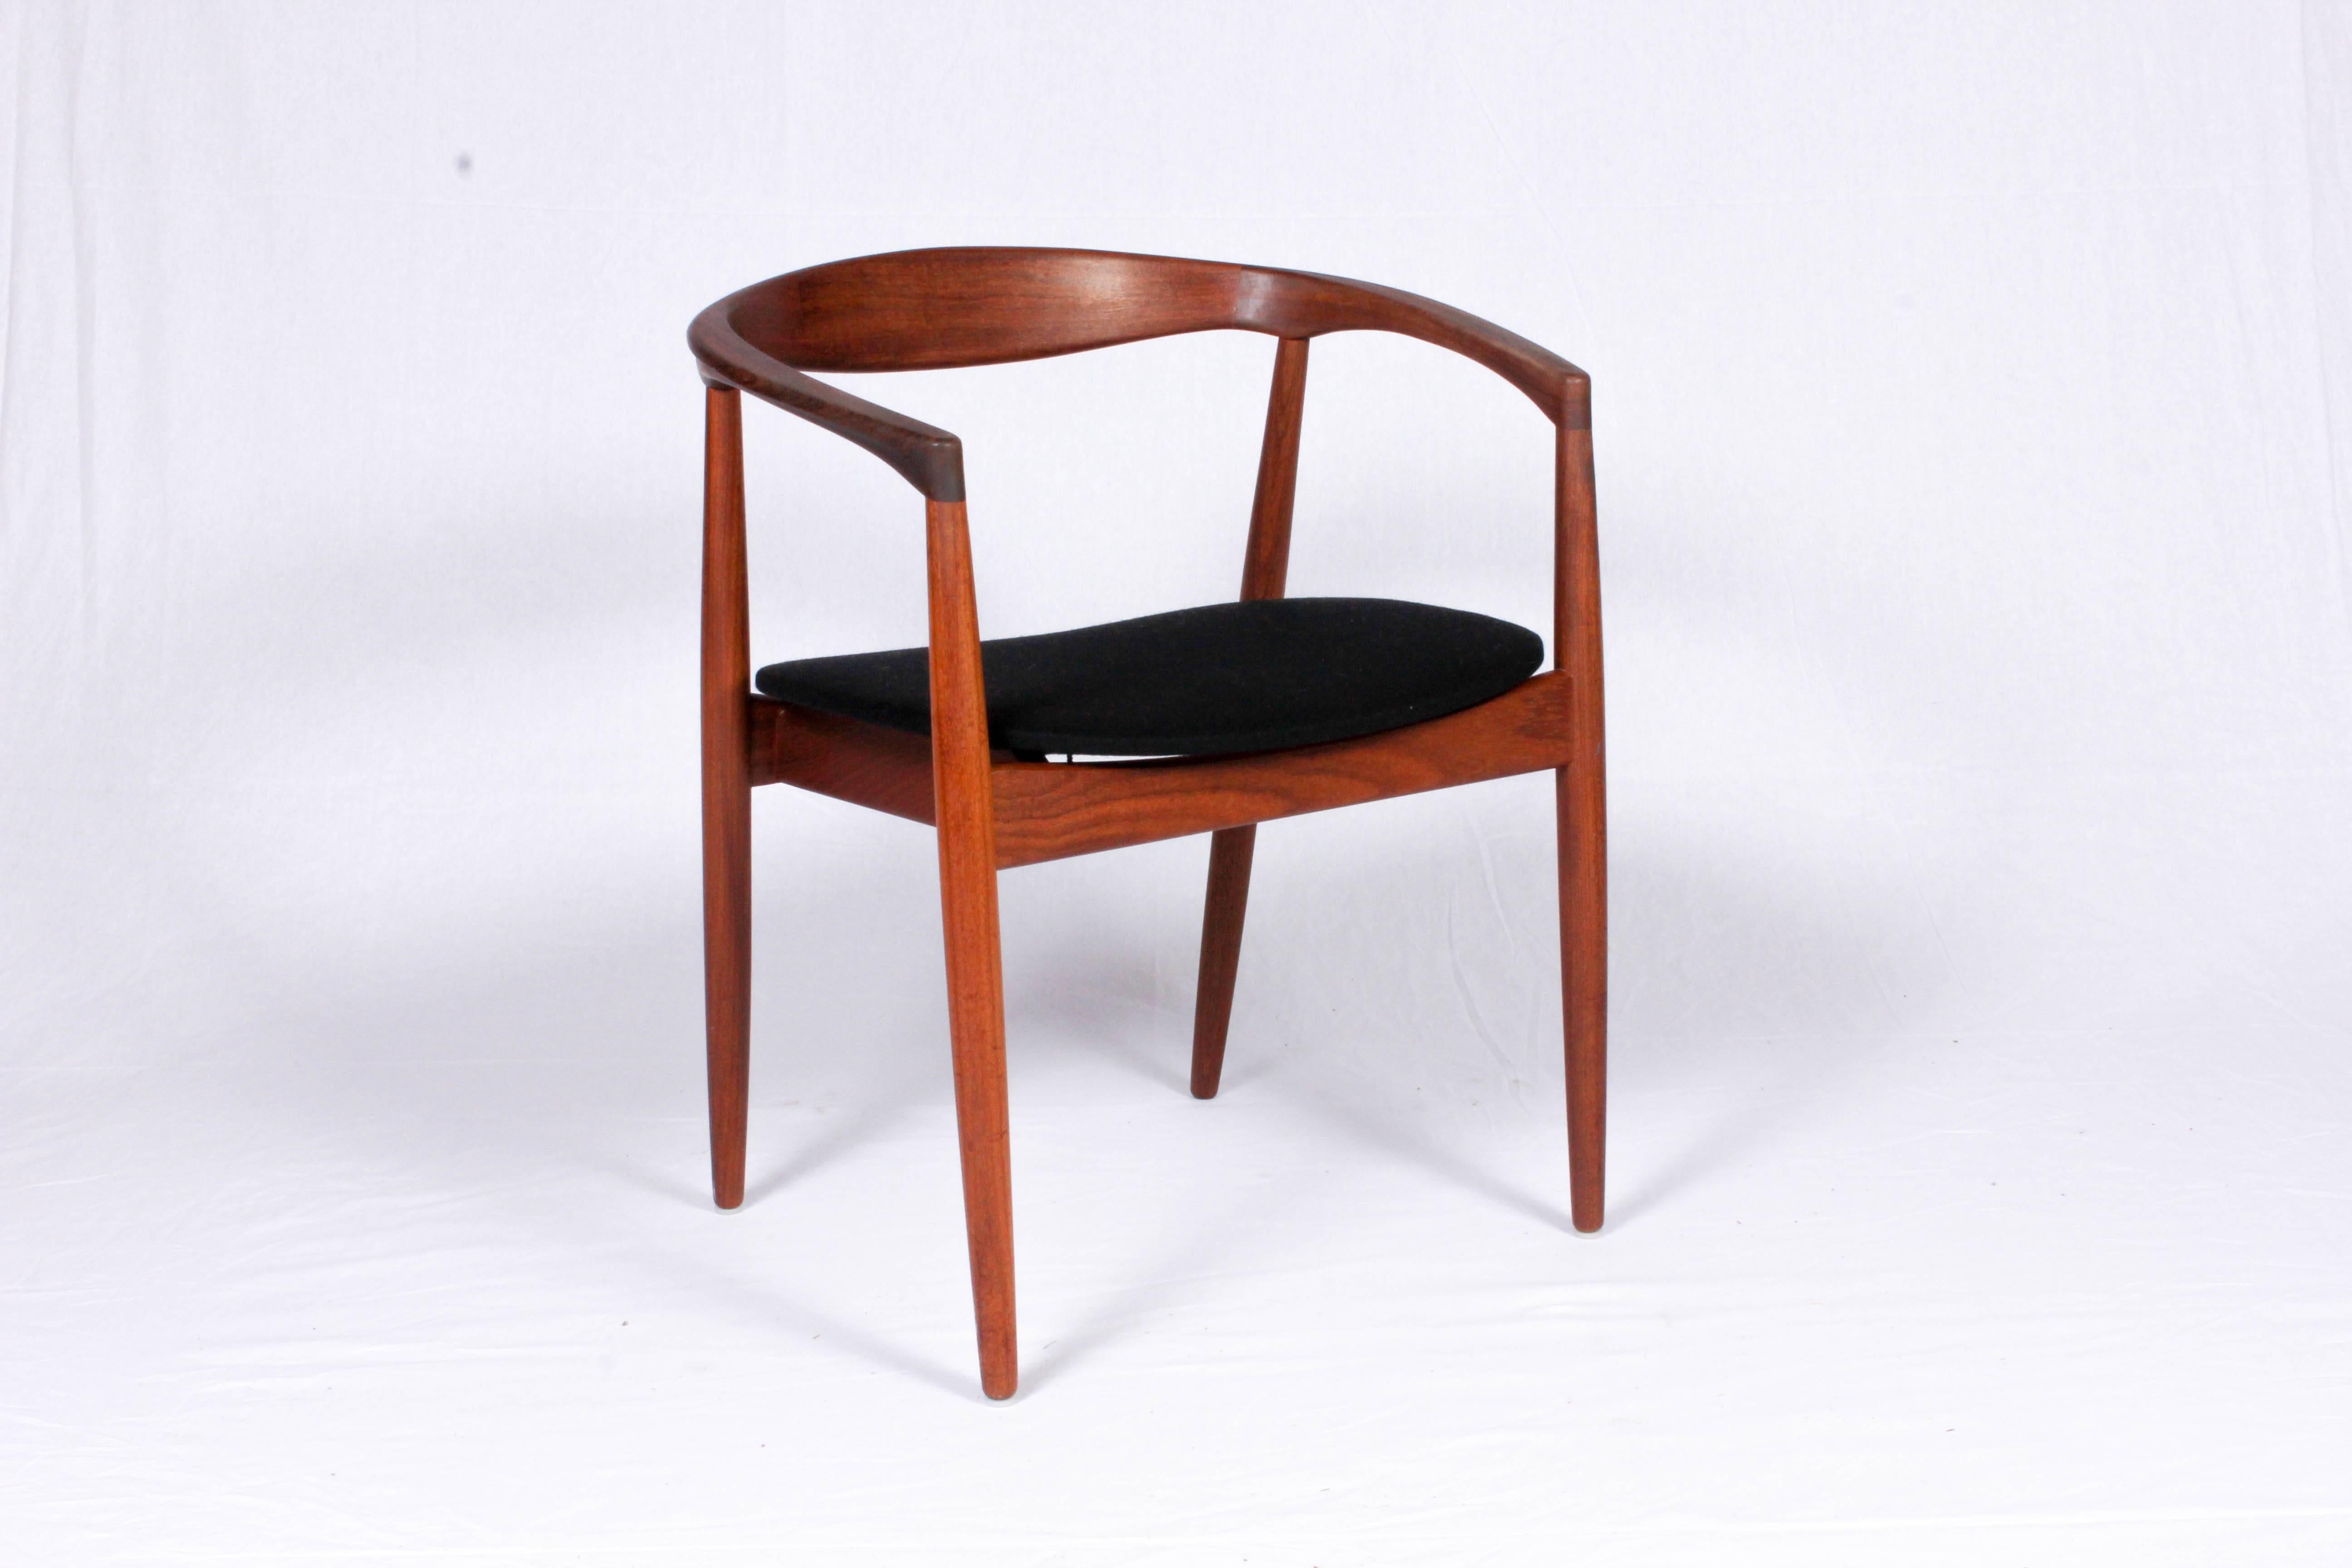 Midcentury teak armchair designed by Kai Kristansein. The model is called Troja and is made out of solid teak. The seat is reupholstered in a high quality black 100% wool fabric which is perfect for this chair. 

The chair is in excellent vintage